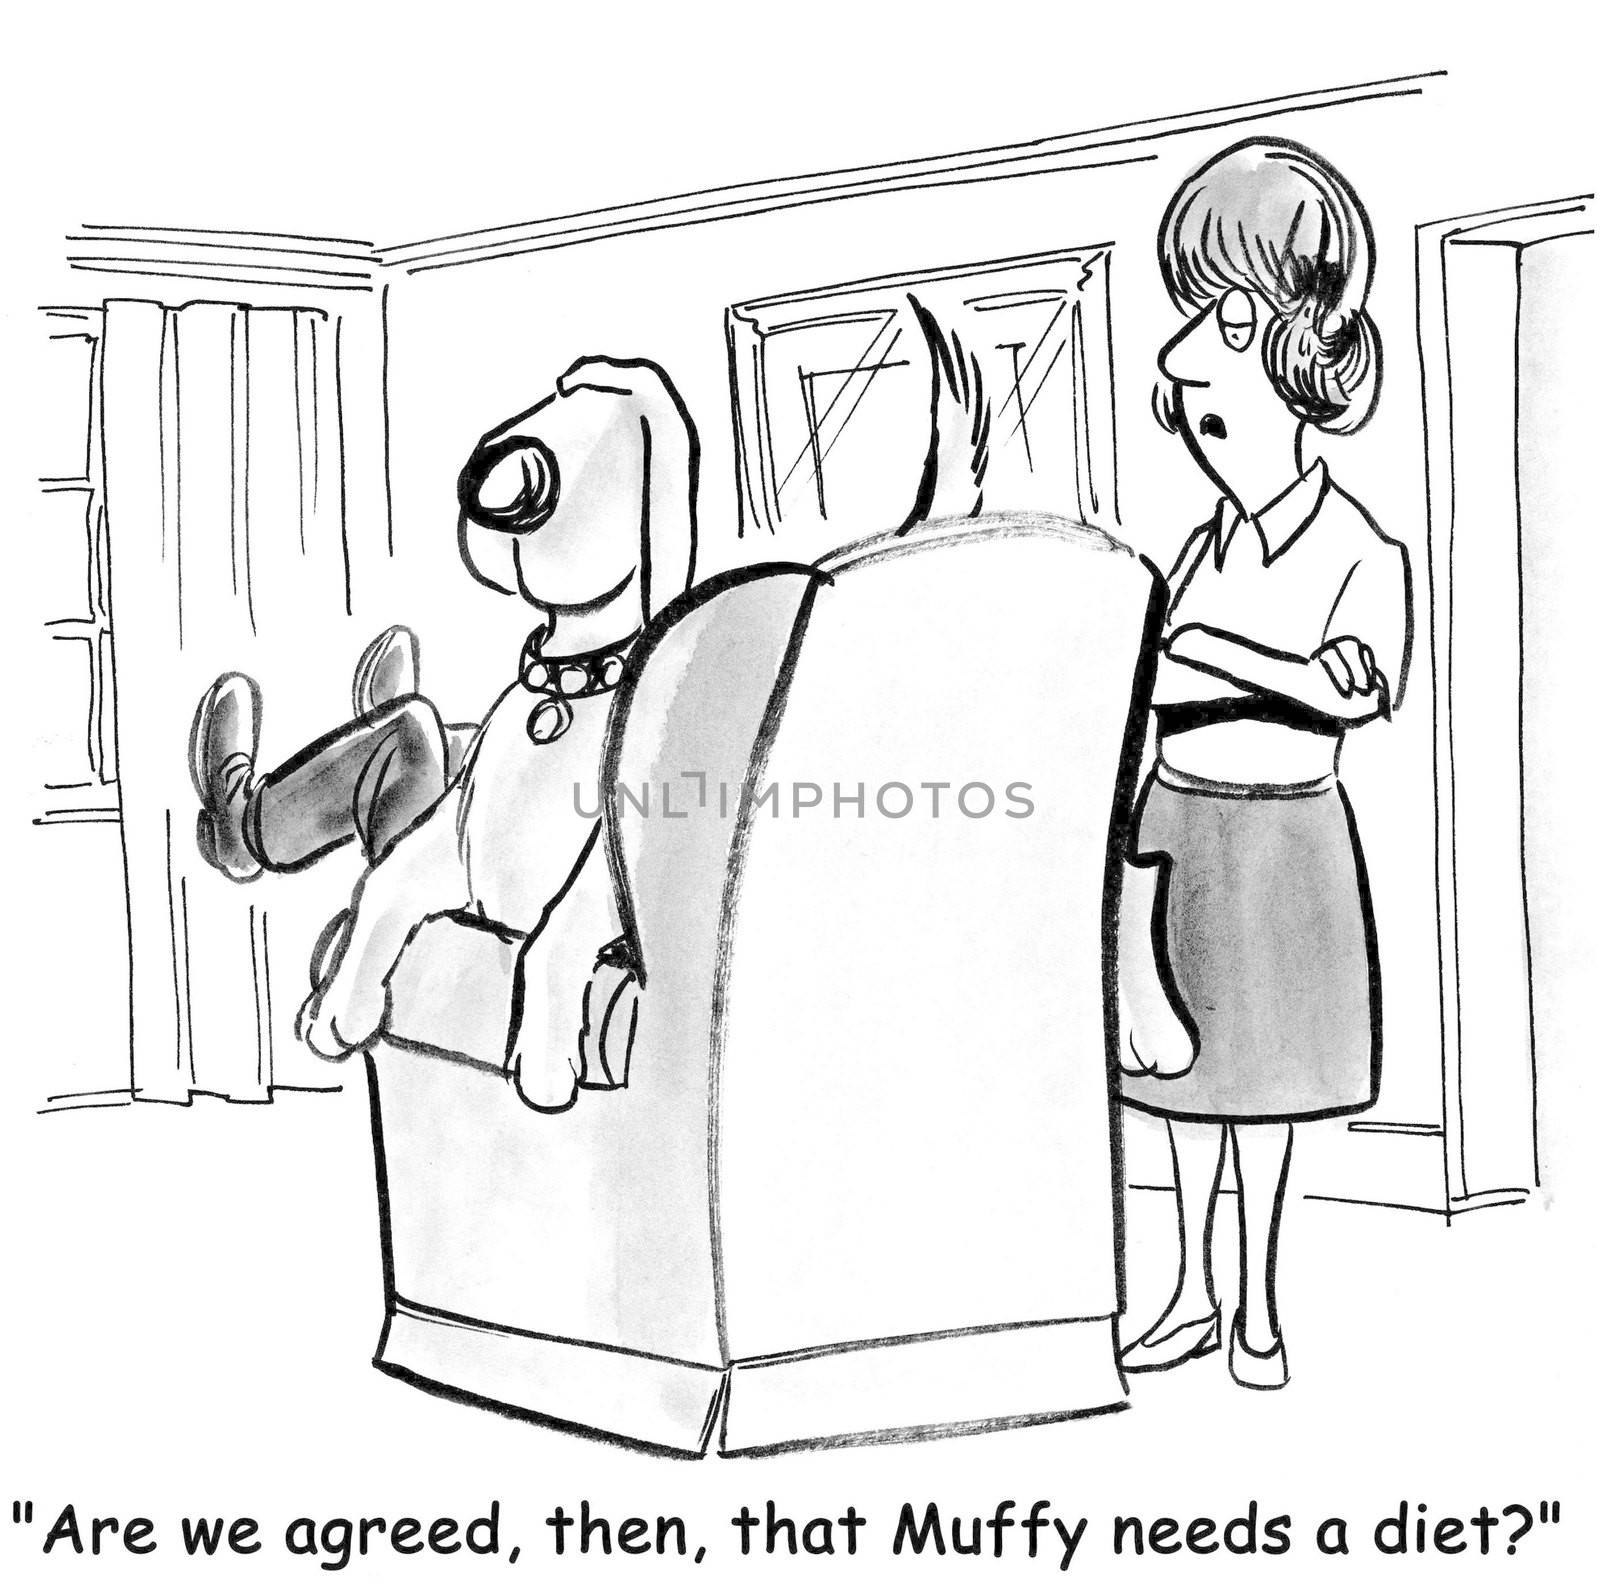 "Are we agreed then, that Muffy needs a diet?"